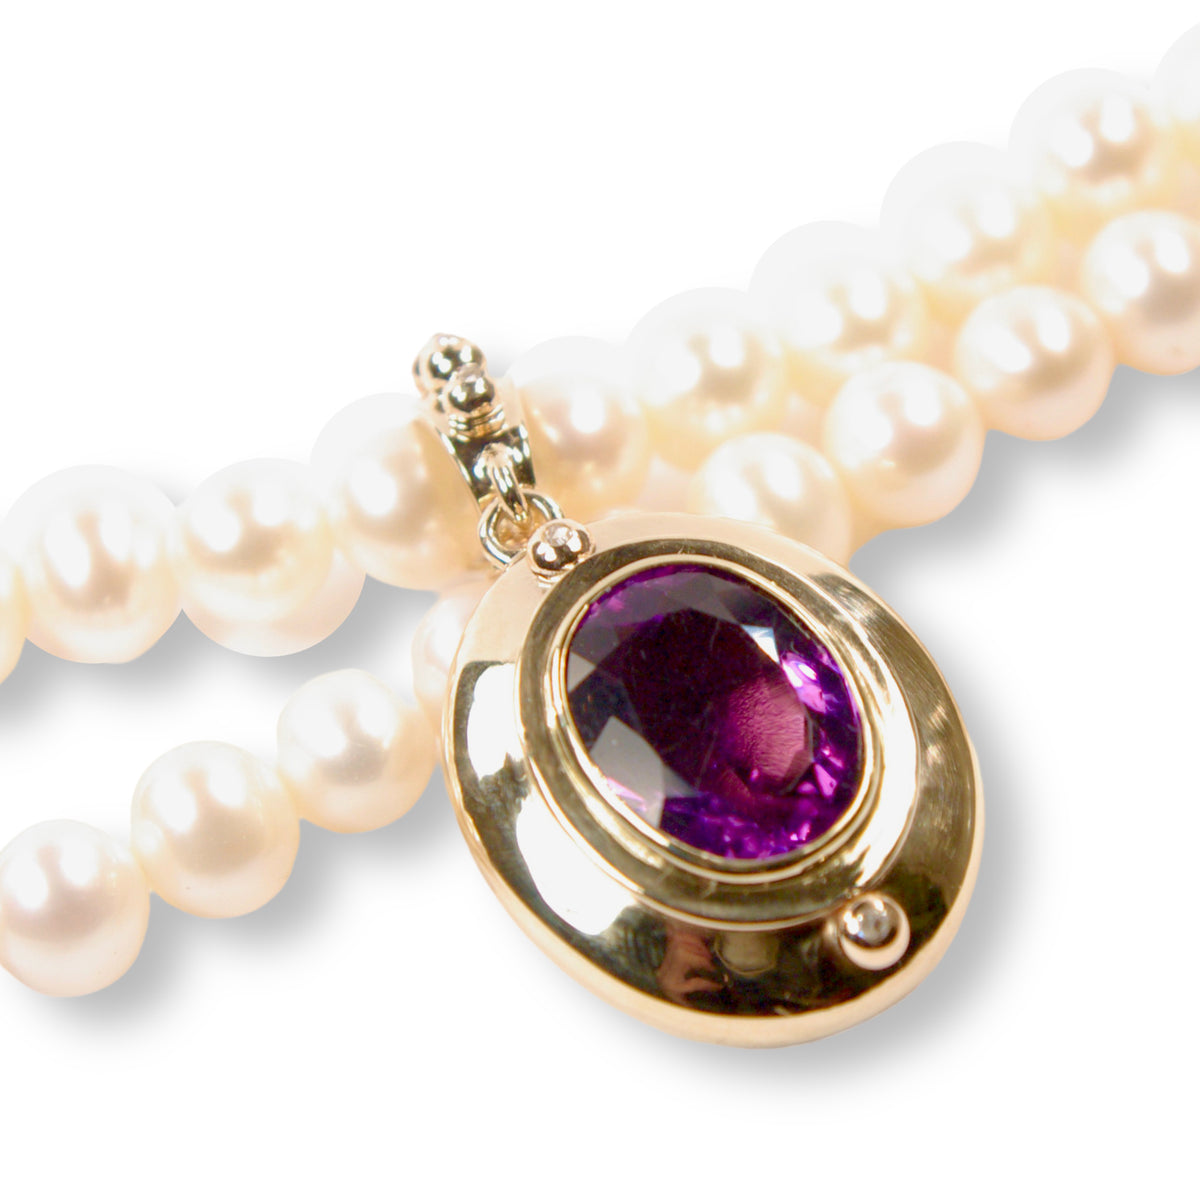 Elsie&#39;s Custom Bespoke Oval Clip-On Pendant For Pearls  | In Remodelled 9ct Gold | Set With Her Own Amethysts